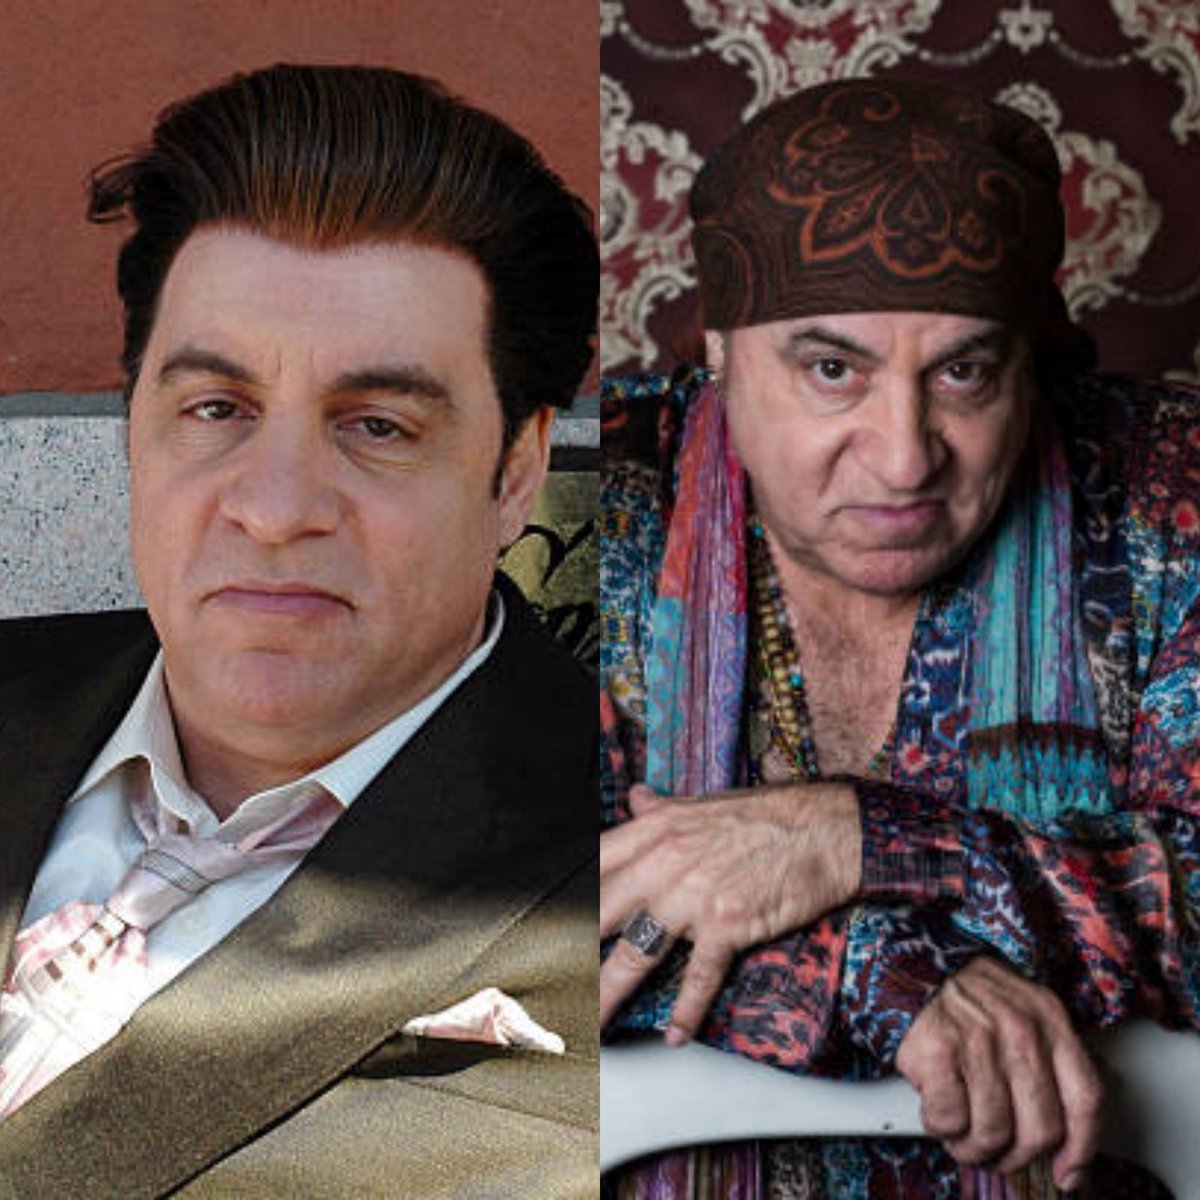 Steve Van Zandt said nothing compared to The Sopranos popularity. 'I’ll tell you the truth, when the show first hit I had been a rock star for 20 years, and within three weeks of that show being on, all people talked about was the Sopranos.'